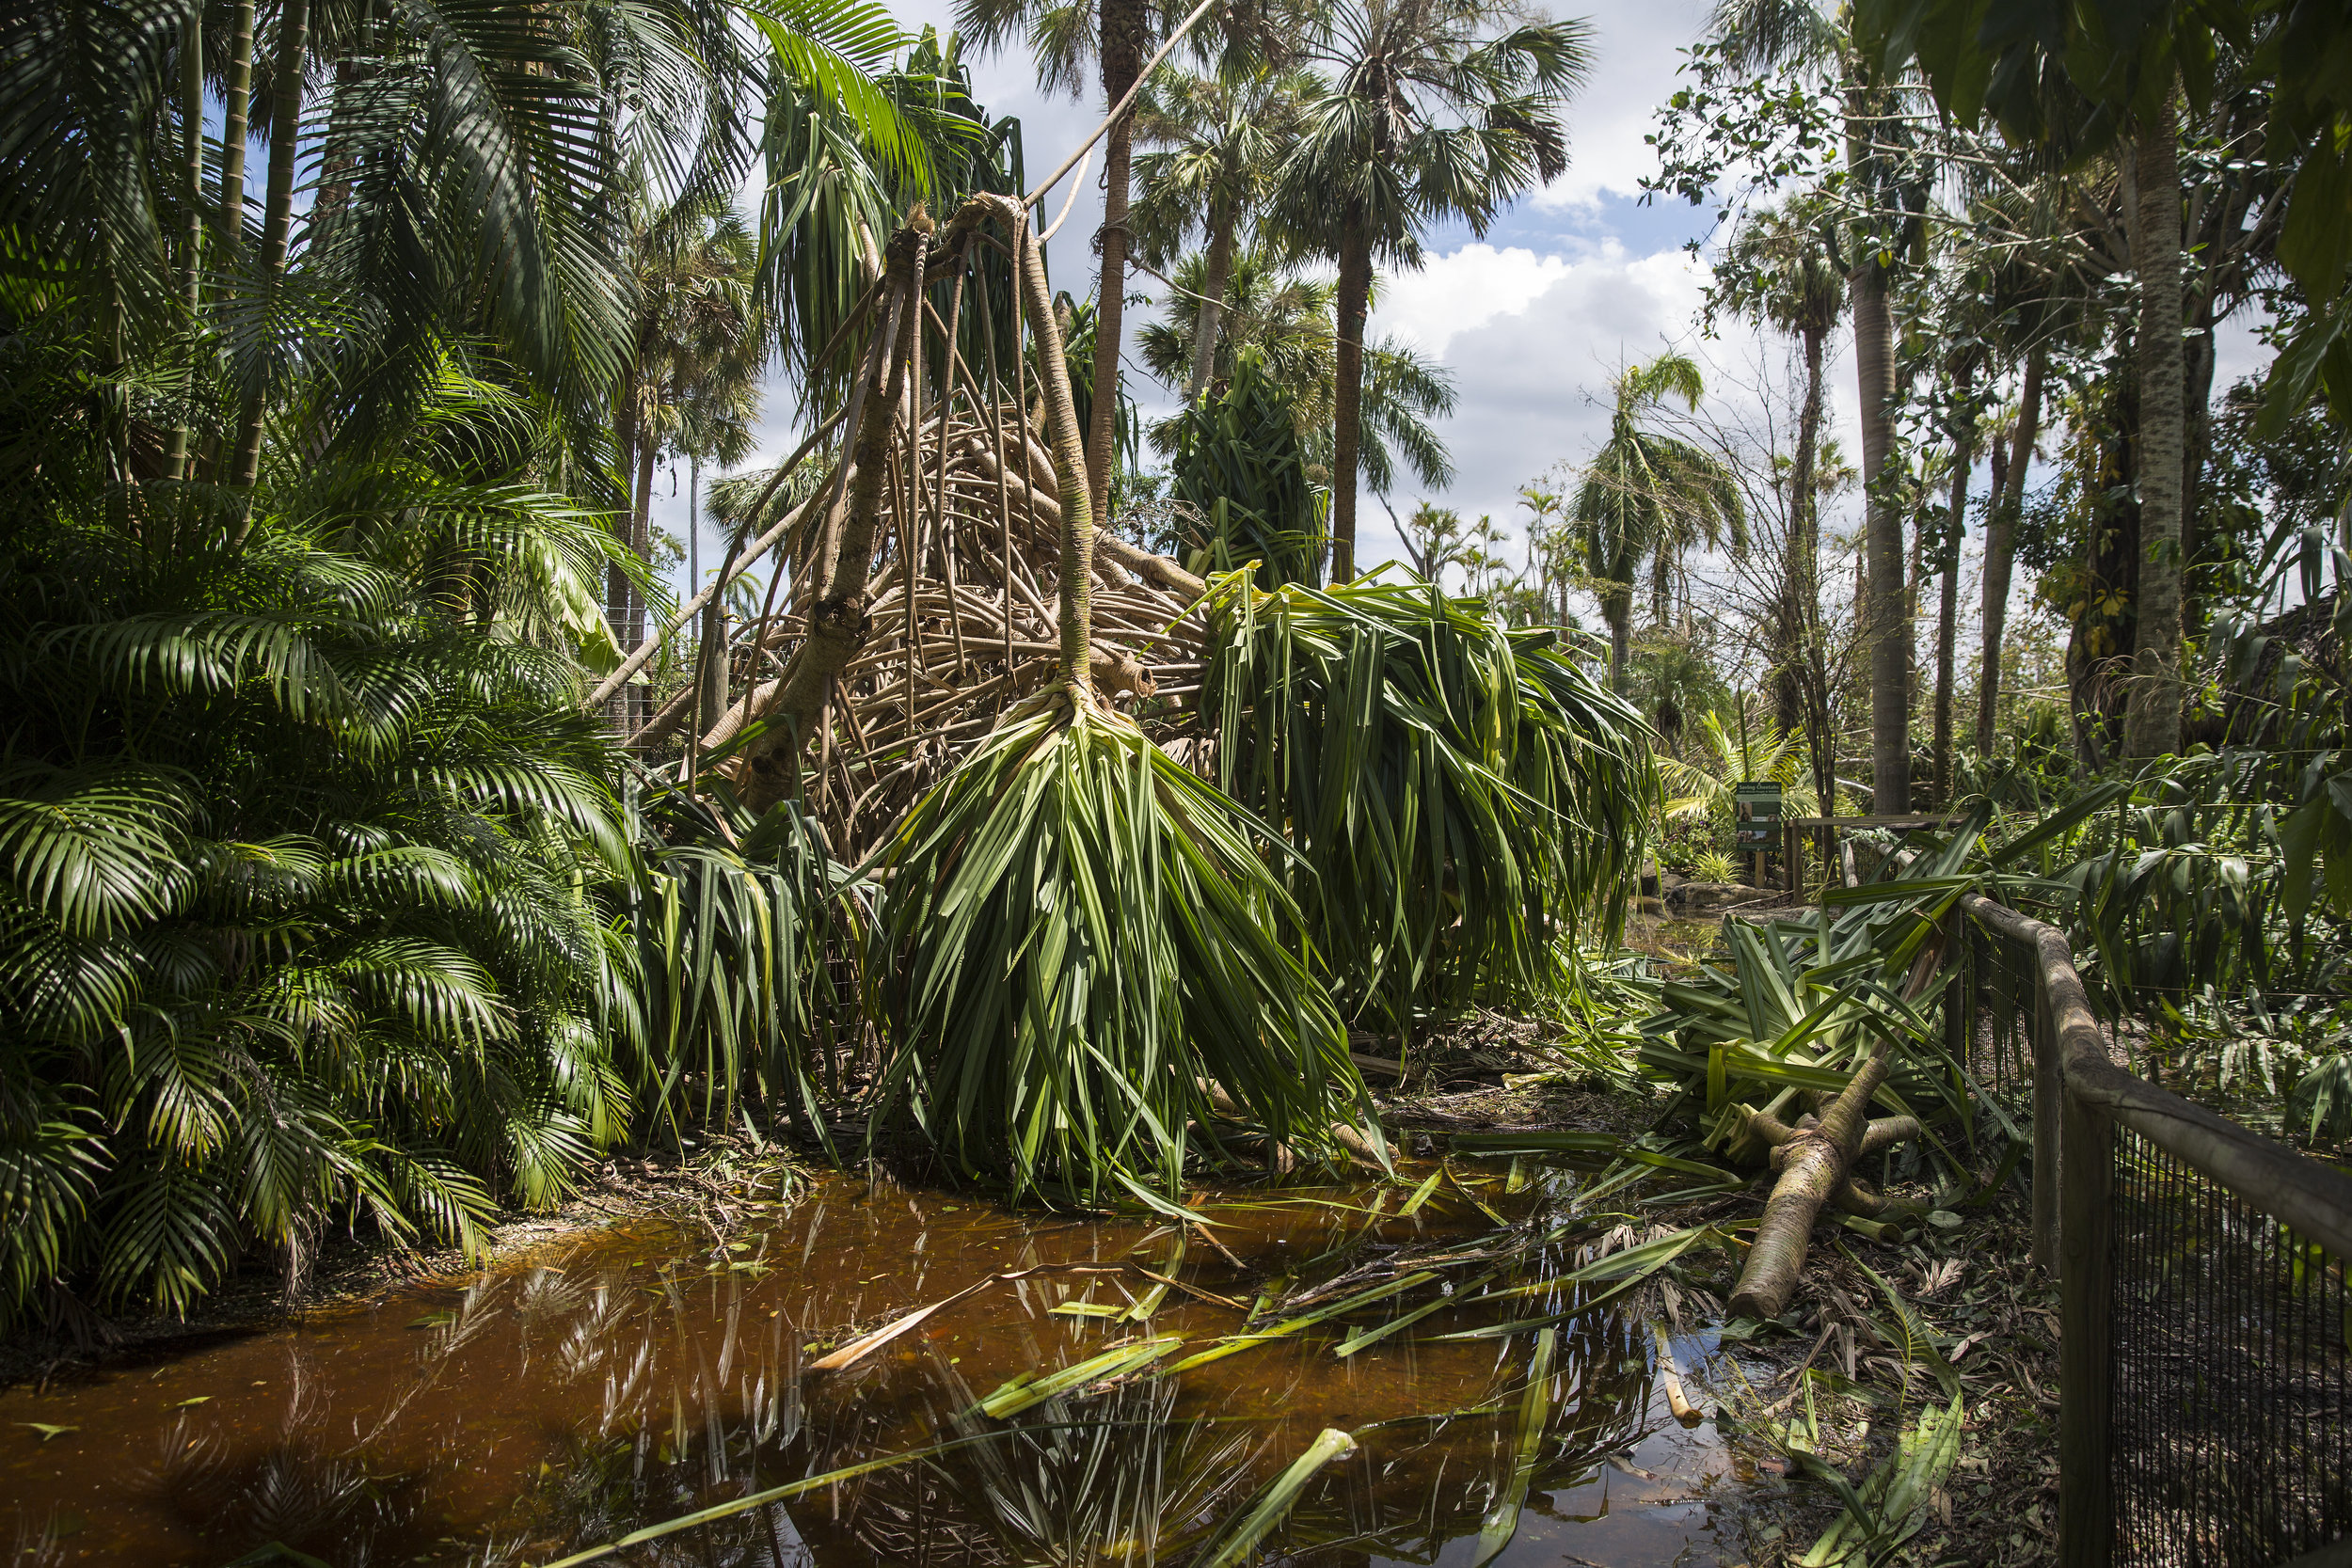  Staff are working to restore the Naples Zoo, which was significantly damaged by Hurricane Irma. High winds and flooding left debris and destruction throughout the park, as seen on Wednesday, September 13, 2017. 